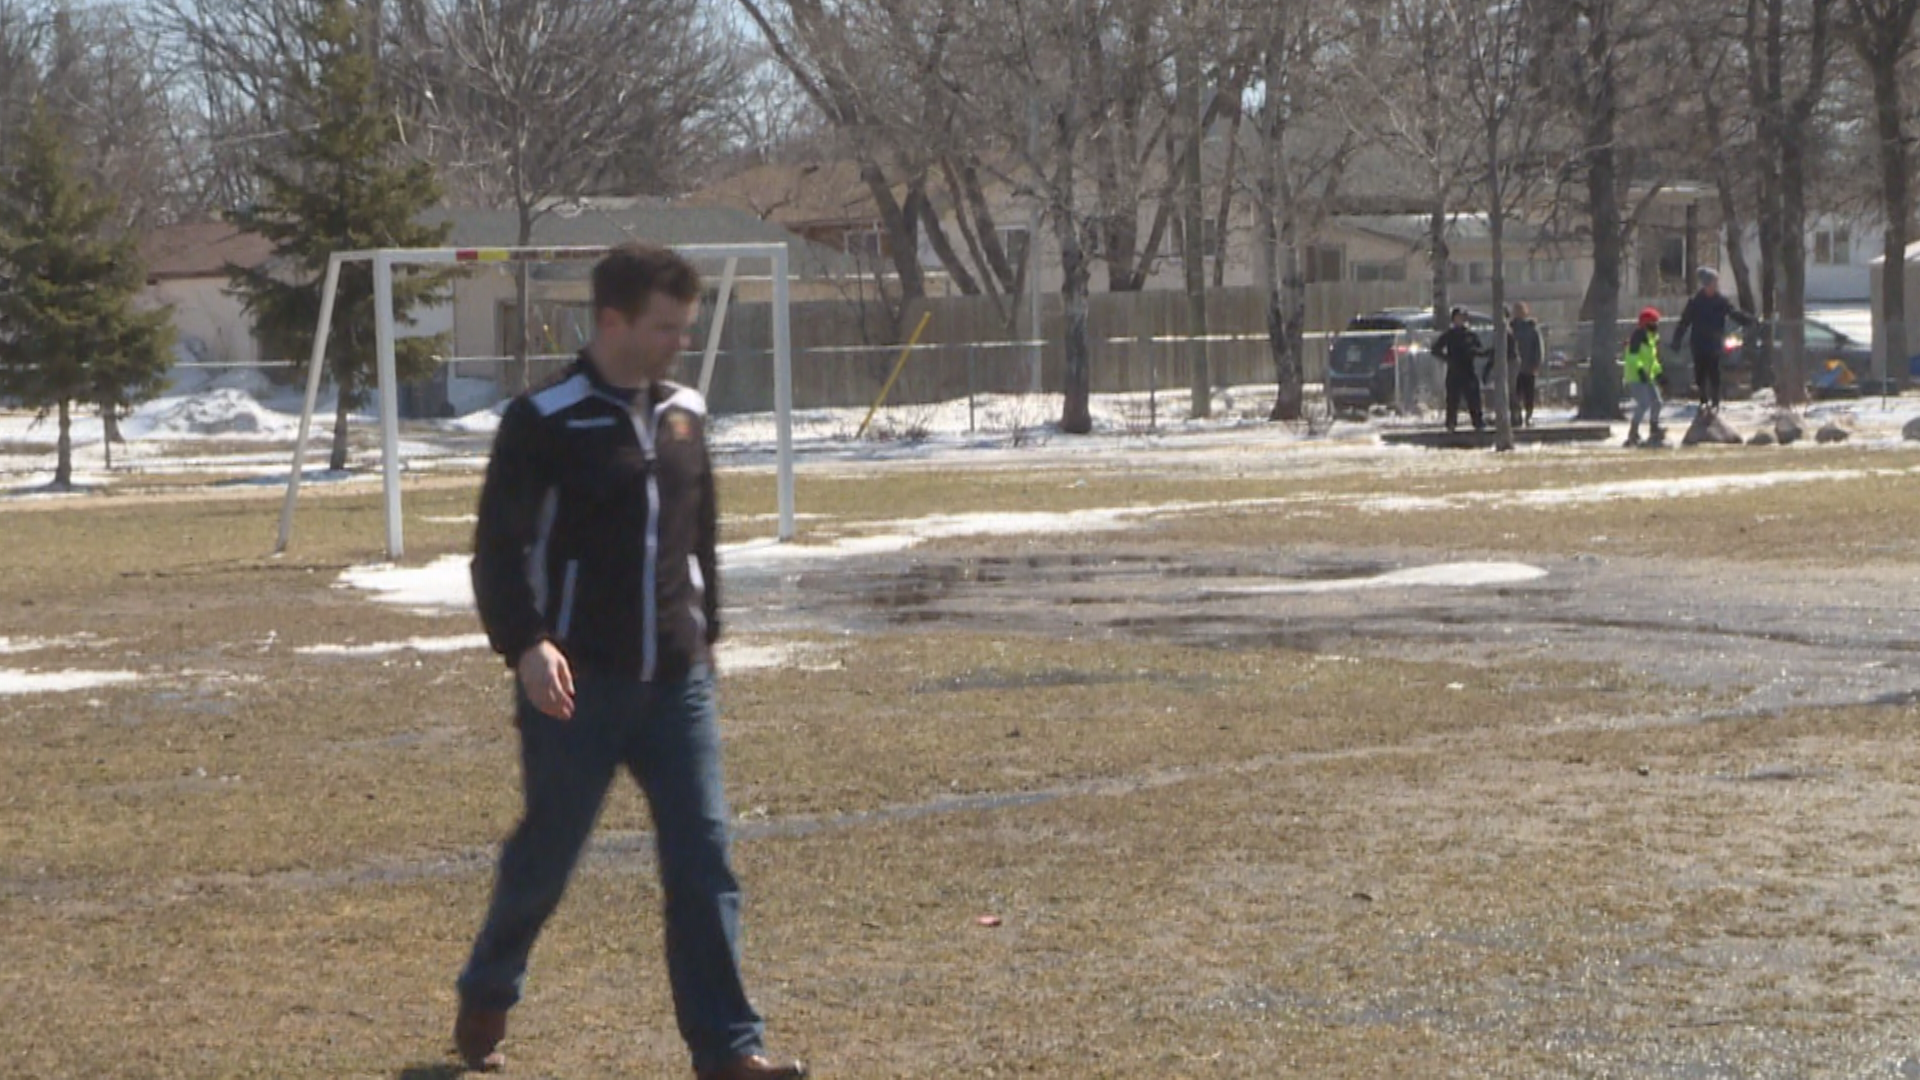 Scott Dixon, the Winnipeg Youth Soccer Association’s executive director, inspecting the field conditions on the south side of the city Monday morning.